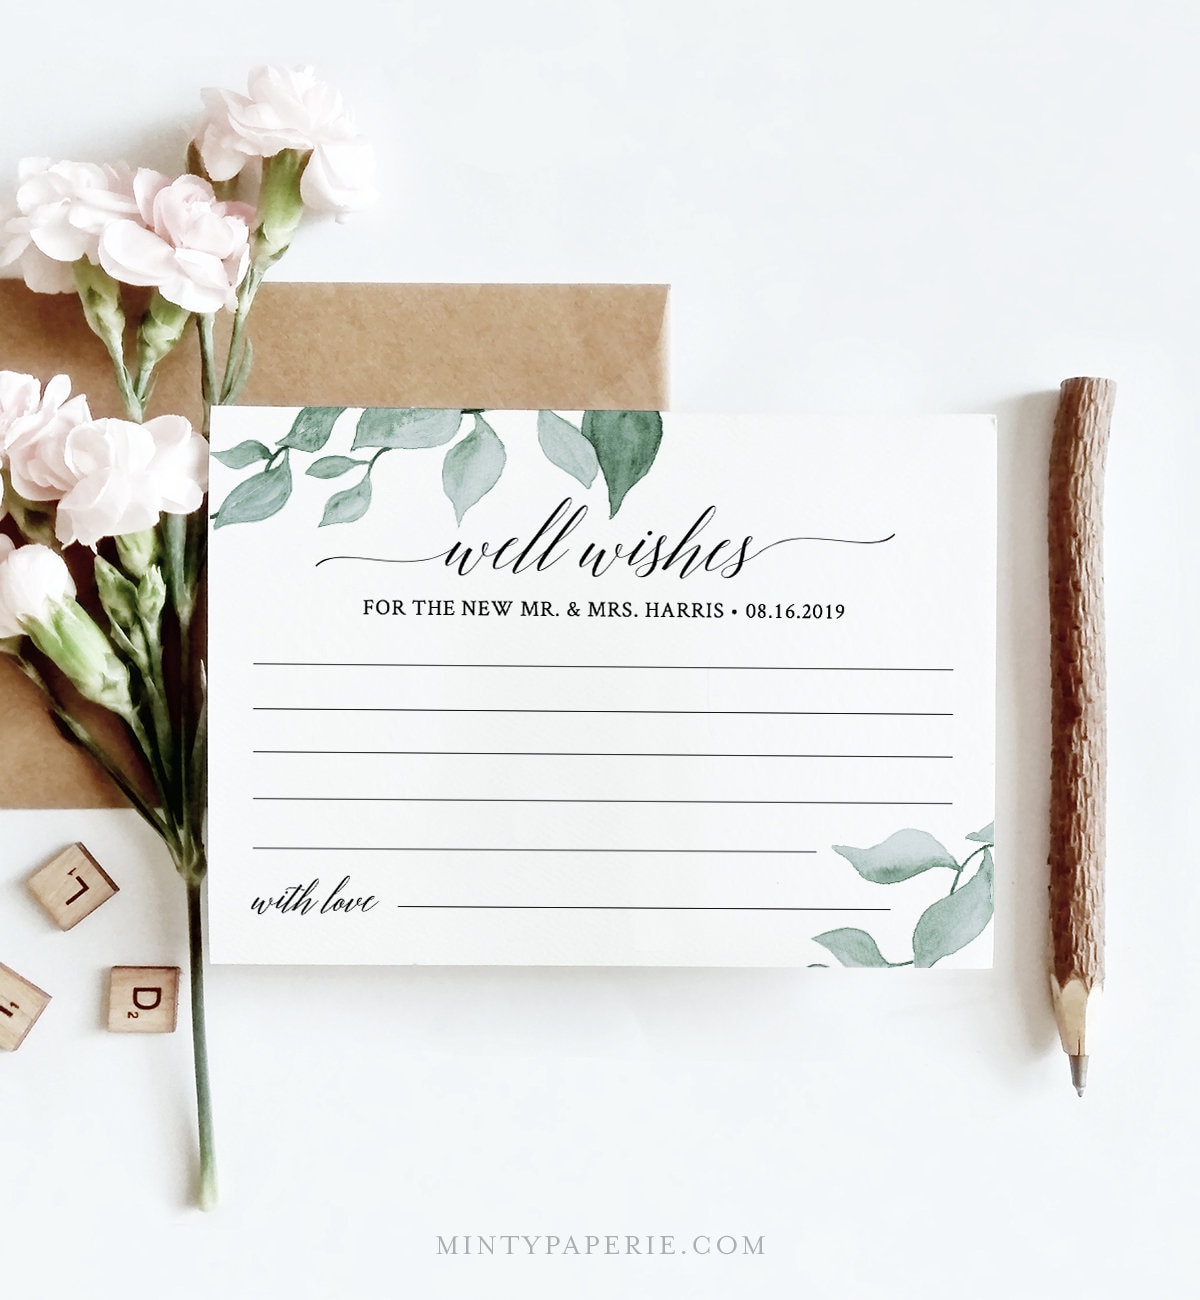 Wedding Well Wishes For Bride And Groom Advice Card Template Etsy Canada